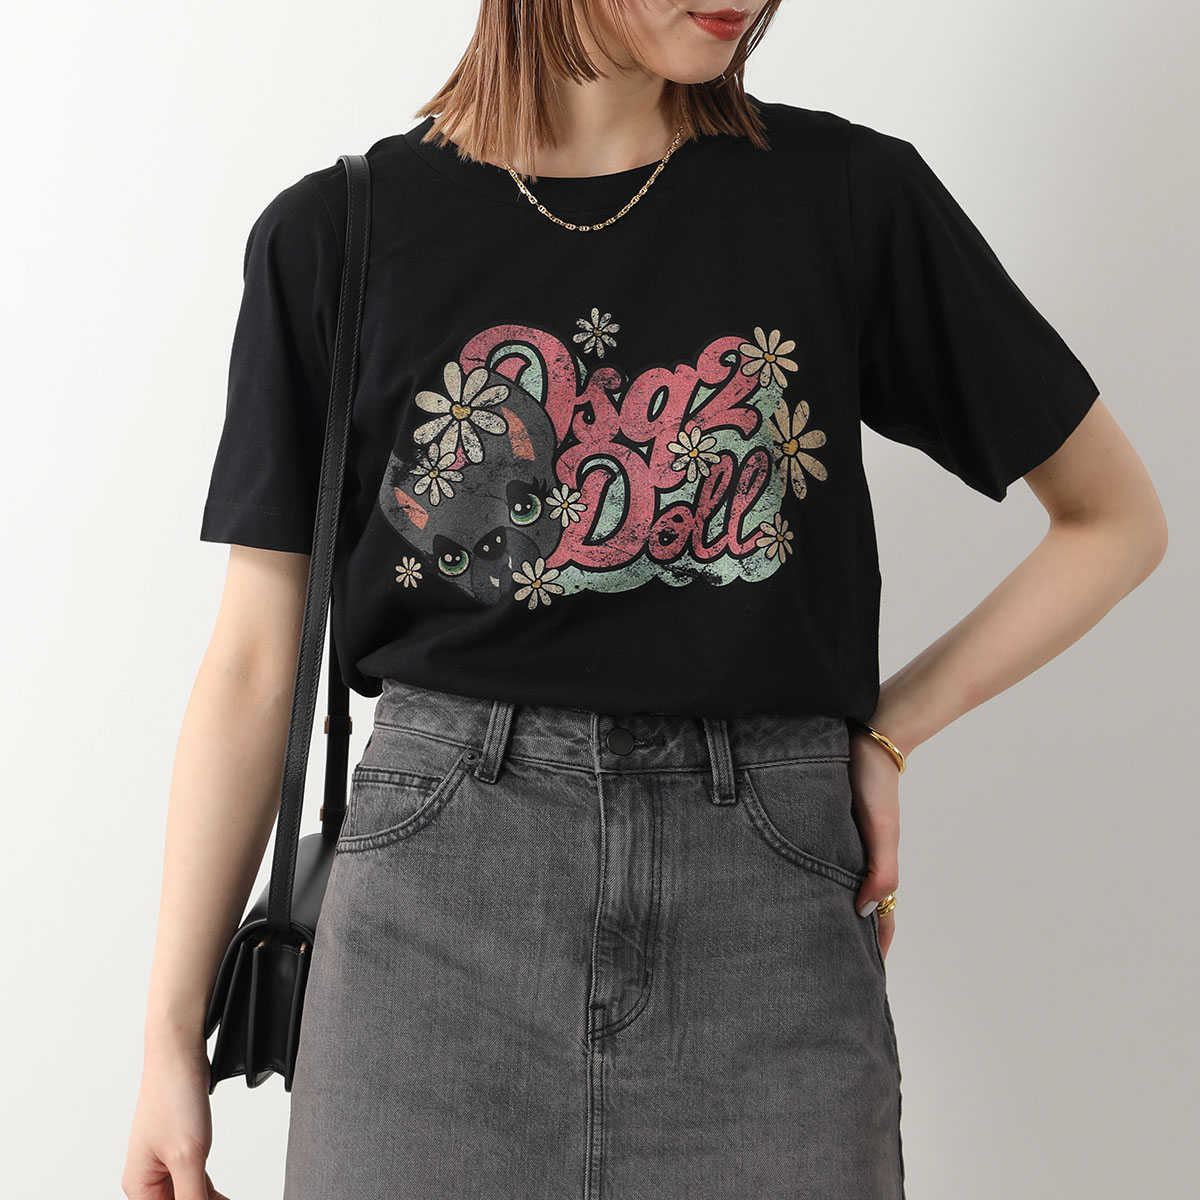 DSQUARED2 Tシャツ HILDE DOLL EASY FIT S75GD0399 S2466...